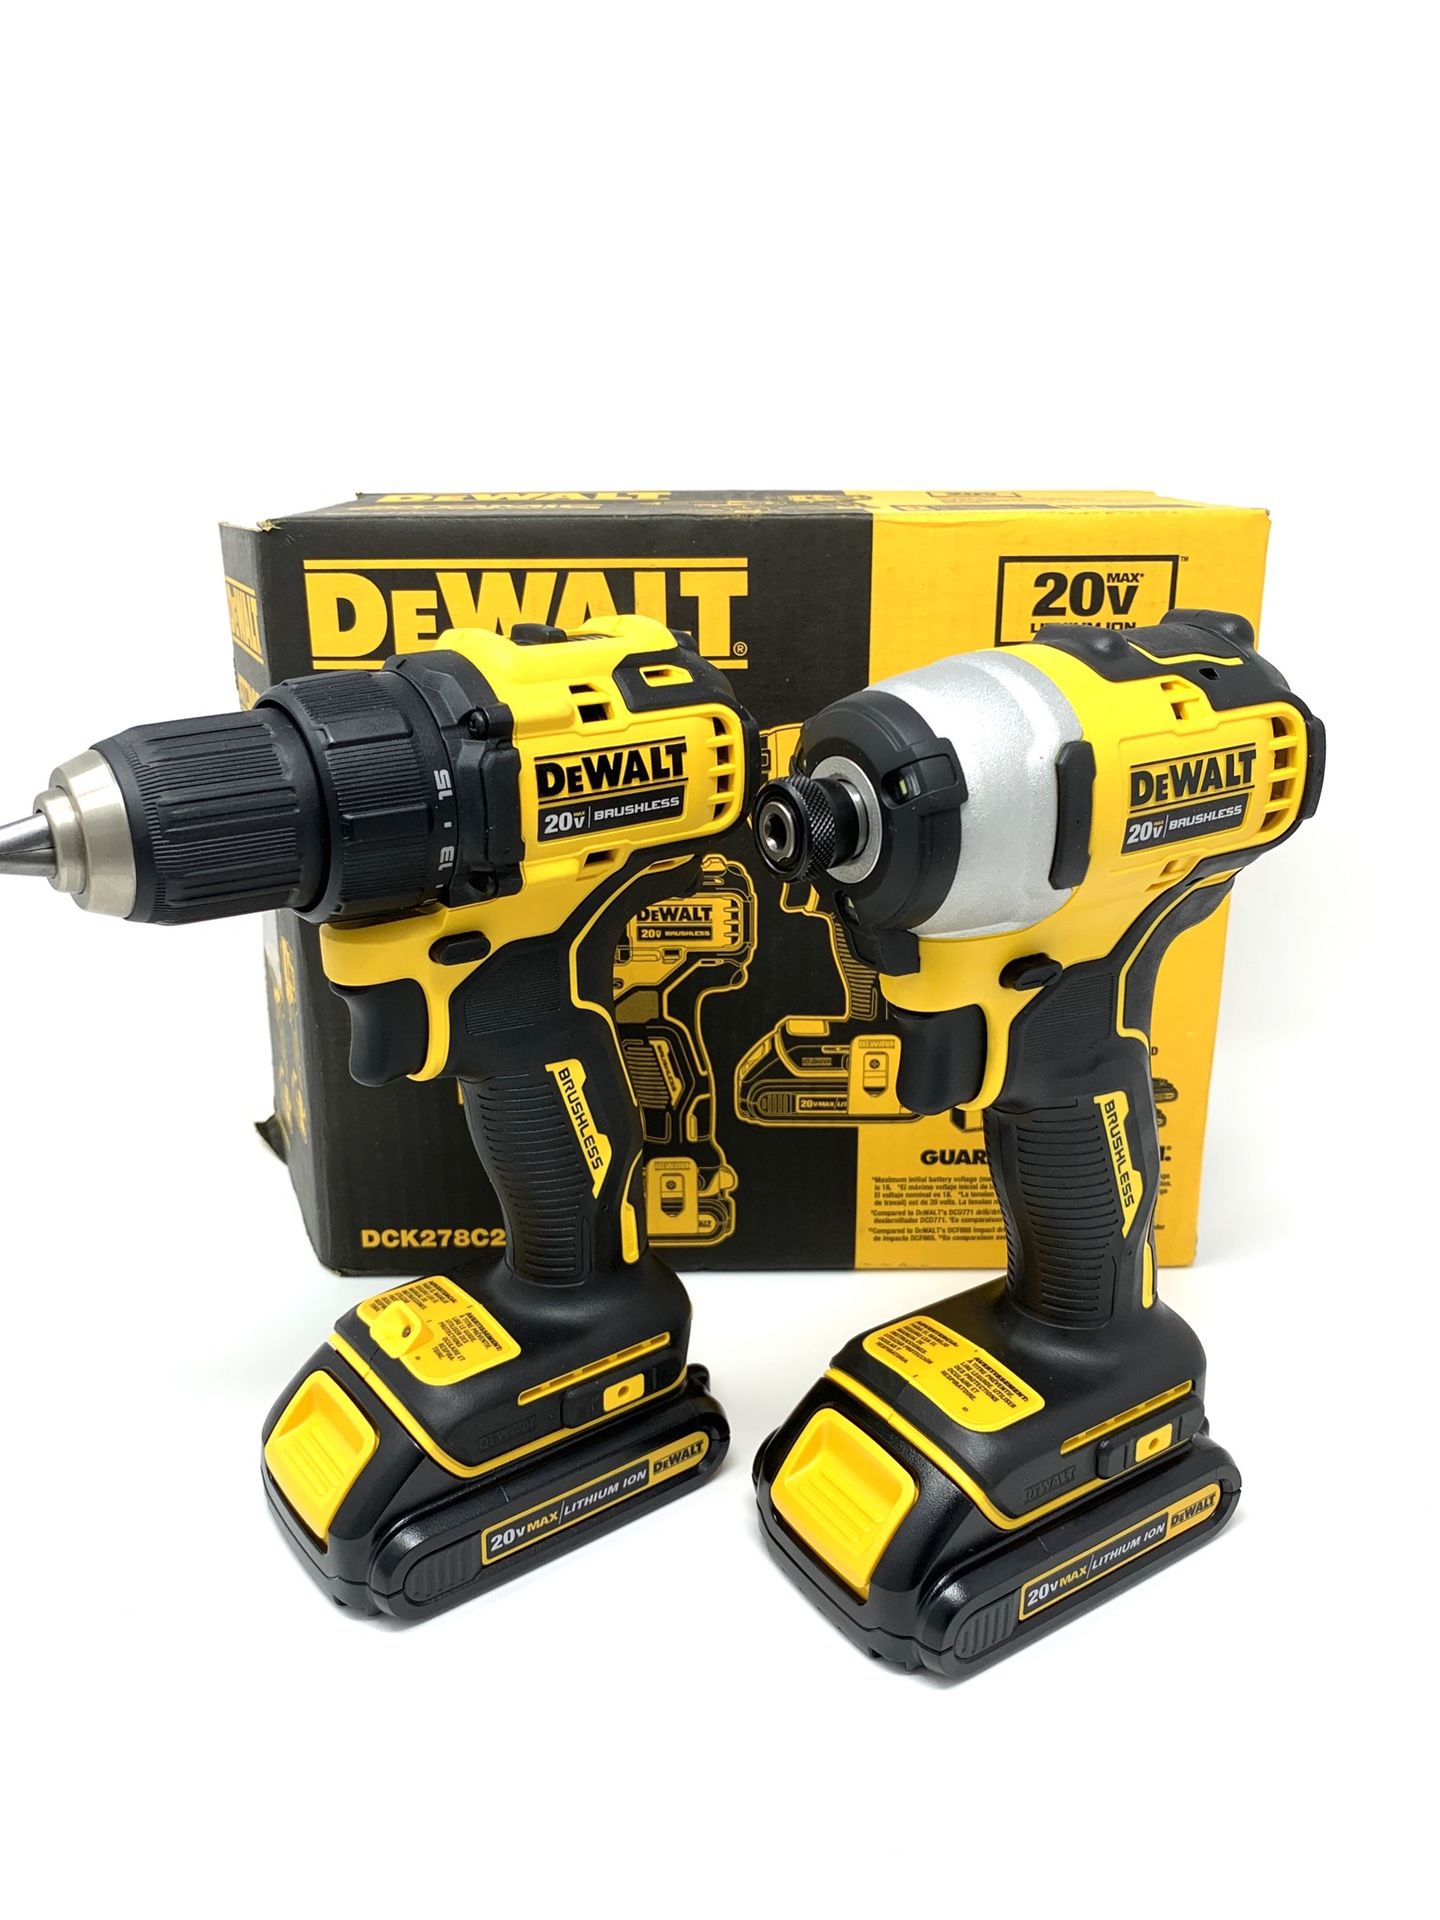 DeWalt ATOMIC 20-Volt MAX Lithium-Ion Brushless Cordless Compact Drill/Impact Combo Kit (2-Tool) 2 Batteries 1.3Ah and Charger